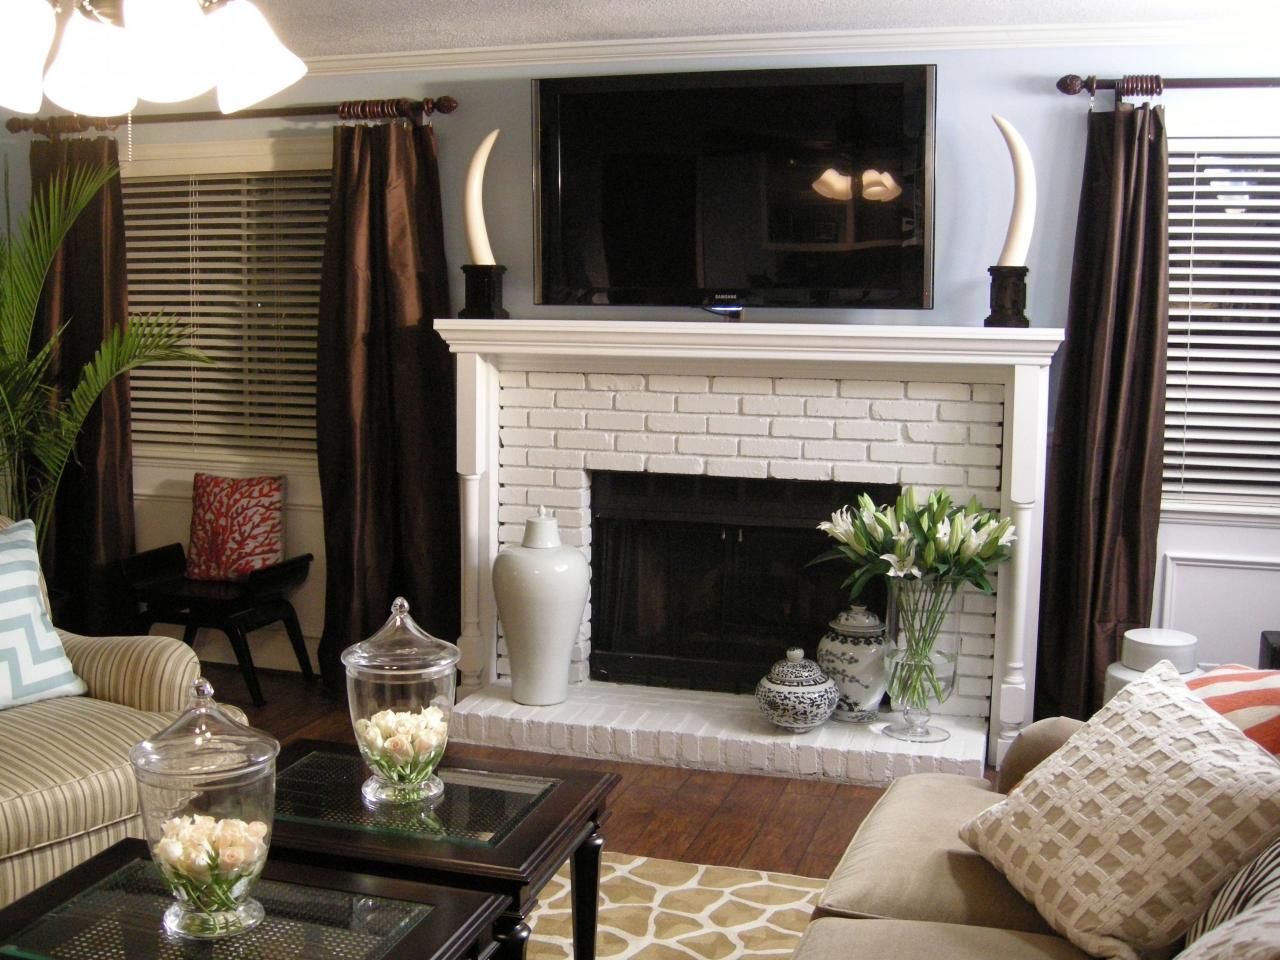 New Fireplace Surround And Mantel, How To Surround A Fireplace